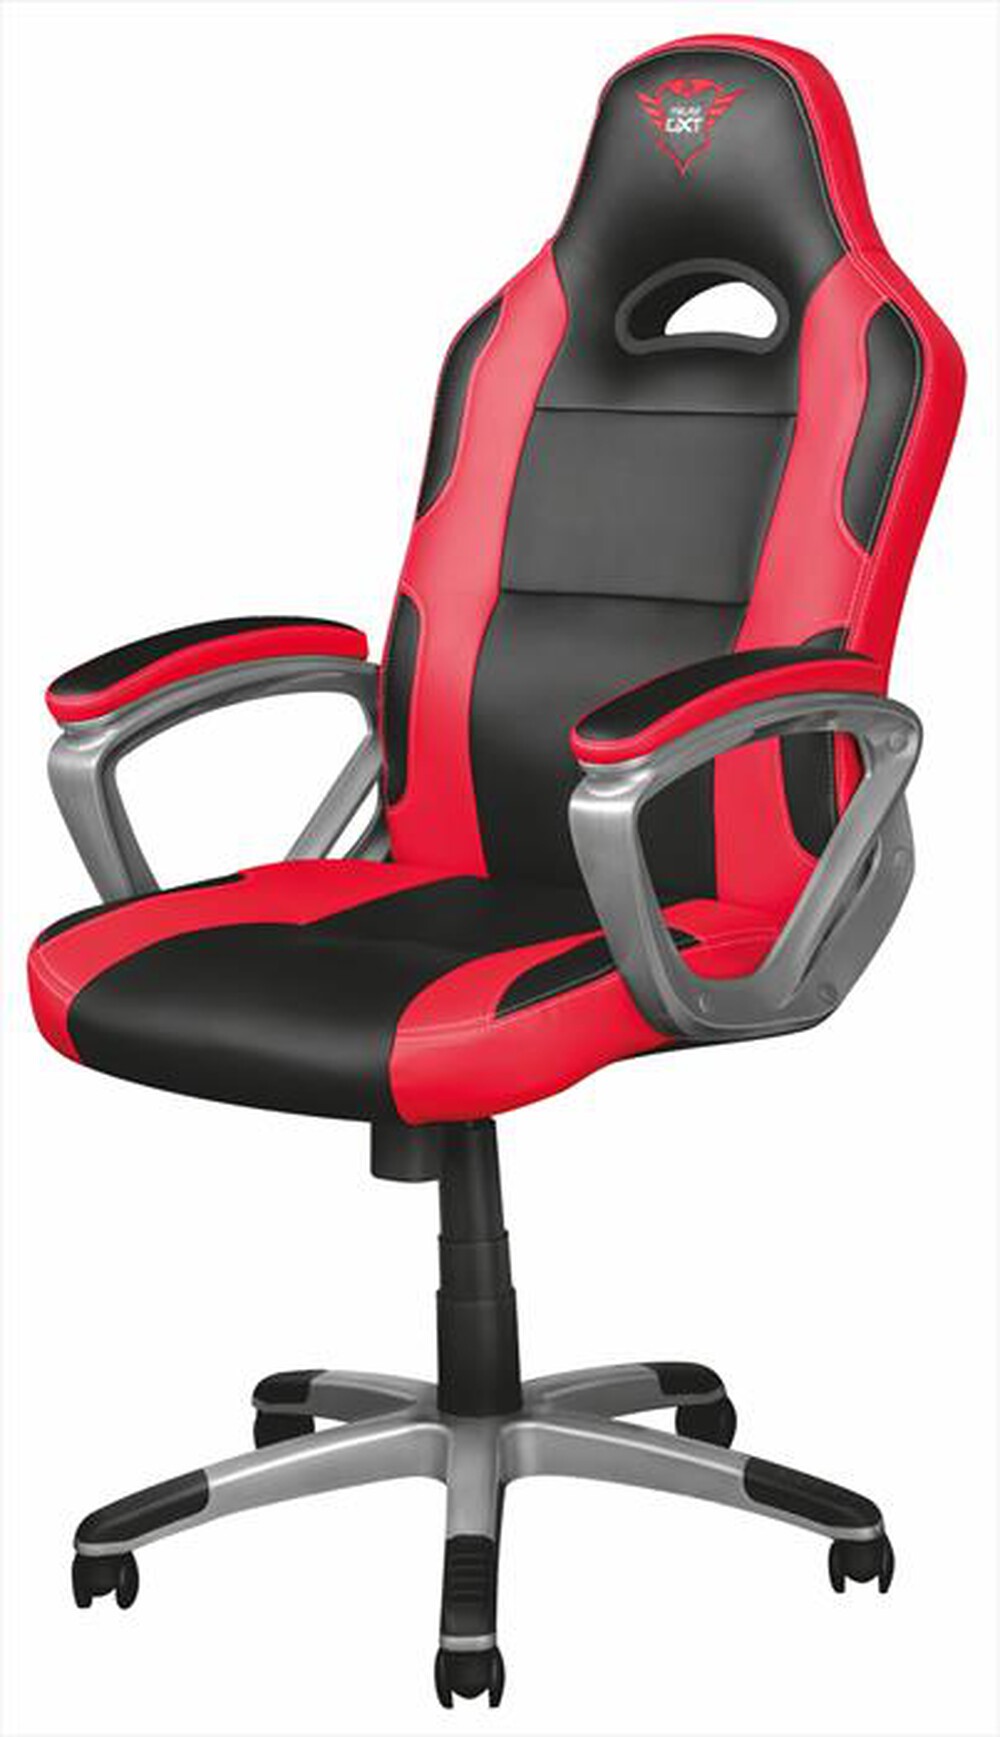 "TRUST - GXT705 RYON GAME CHAIR-Black/Red"